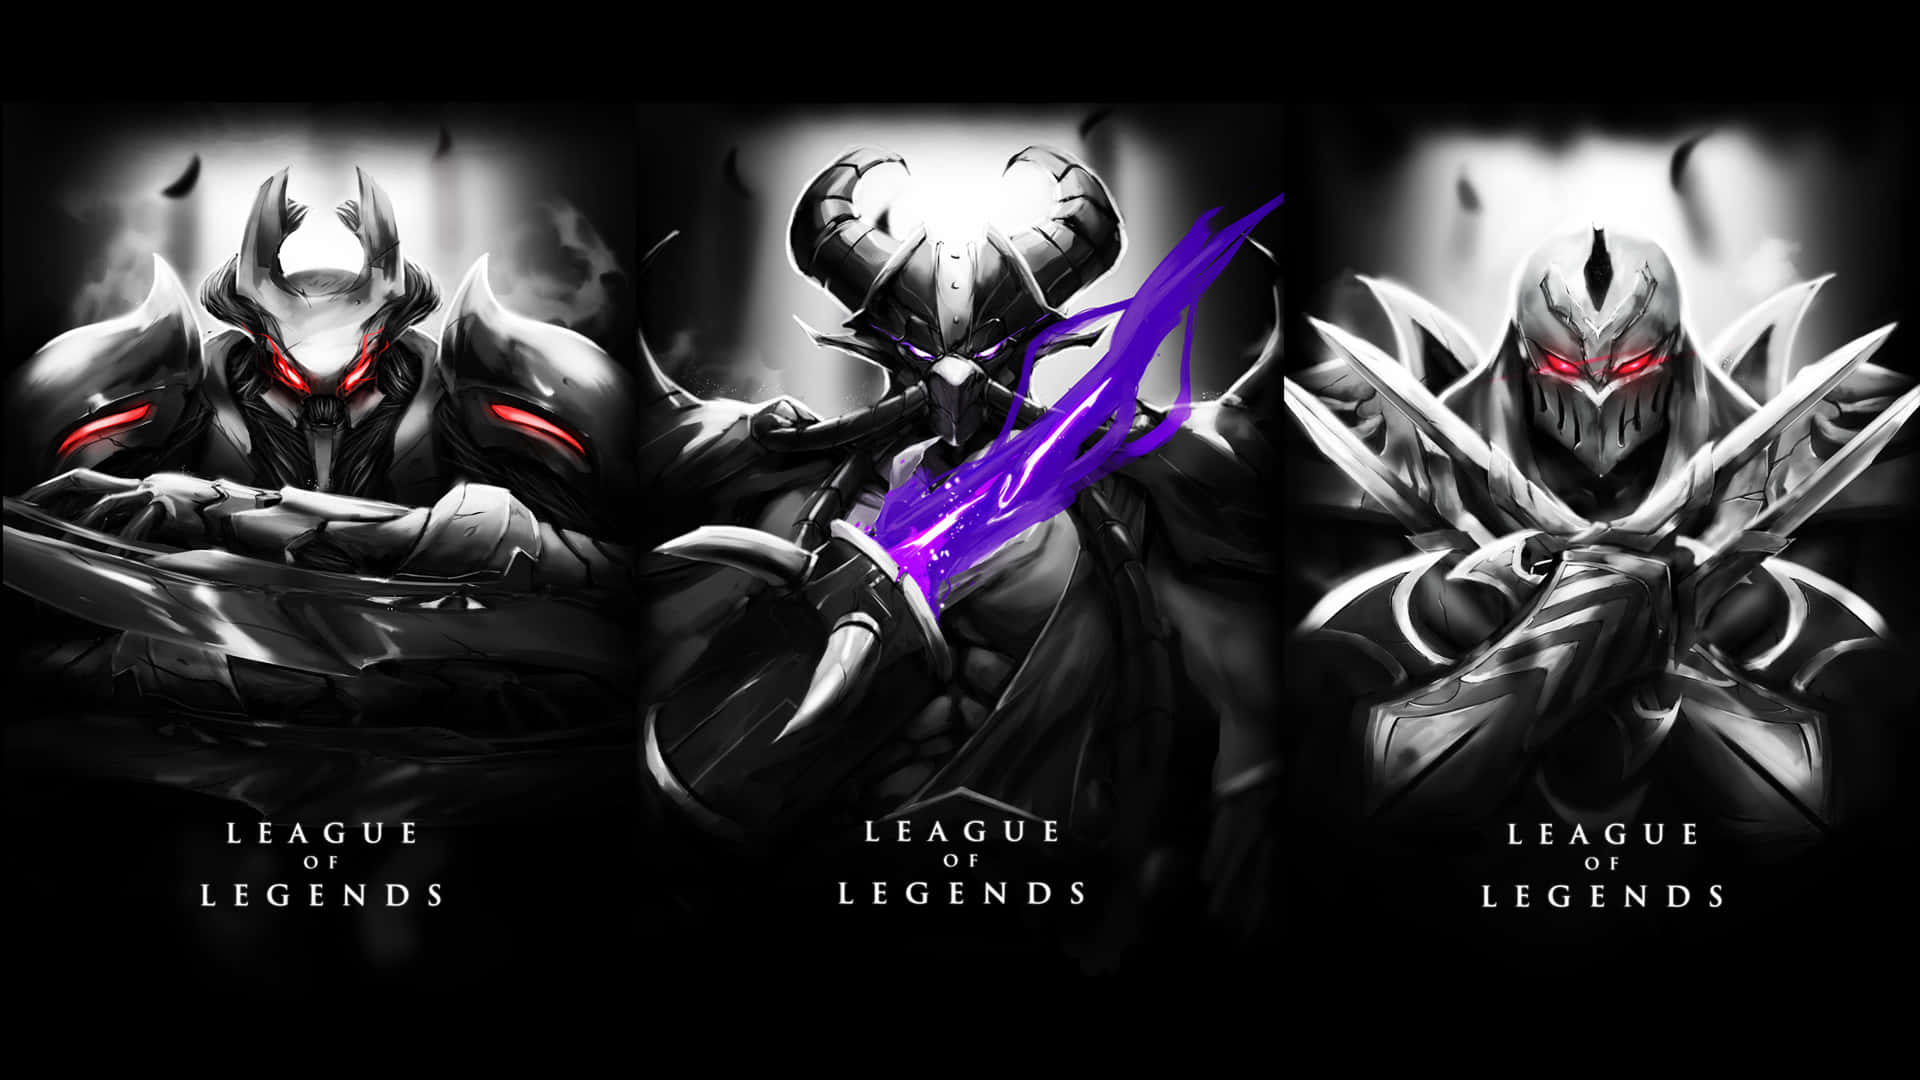 League of Legends – A Game That Captivates Players Around the Globe